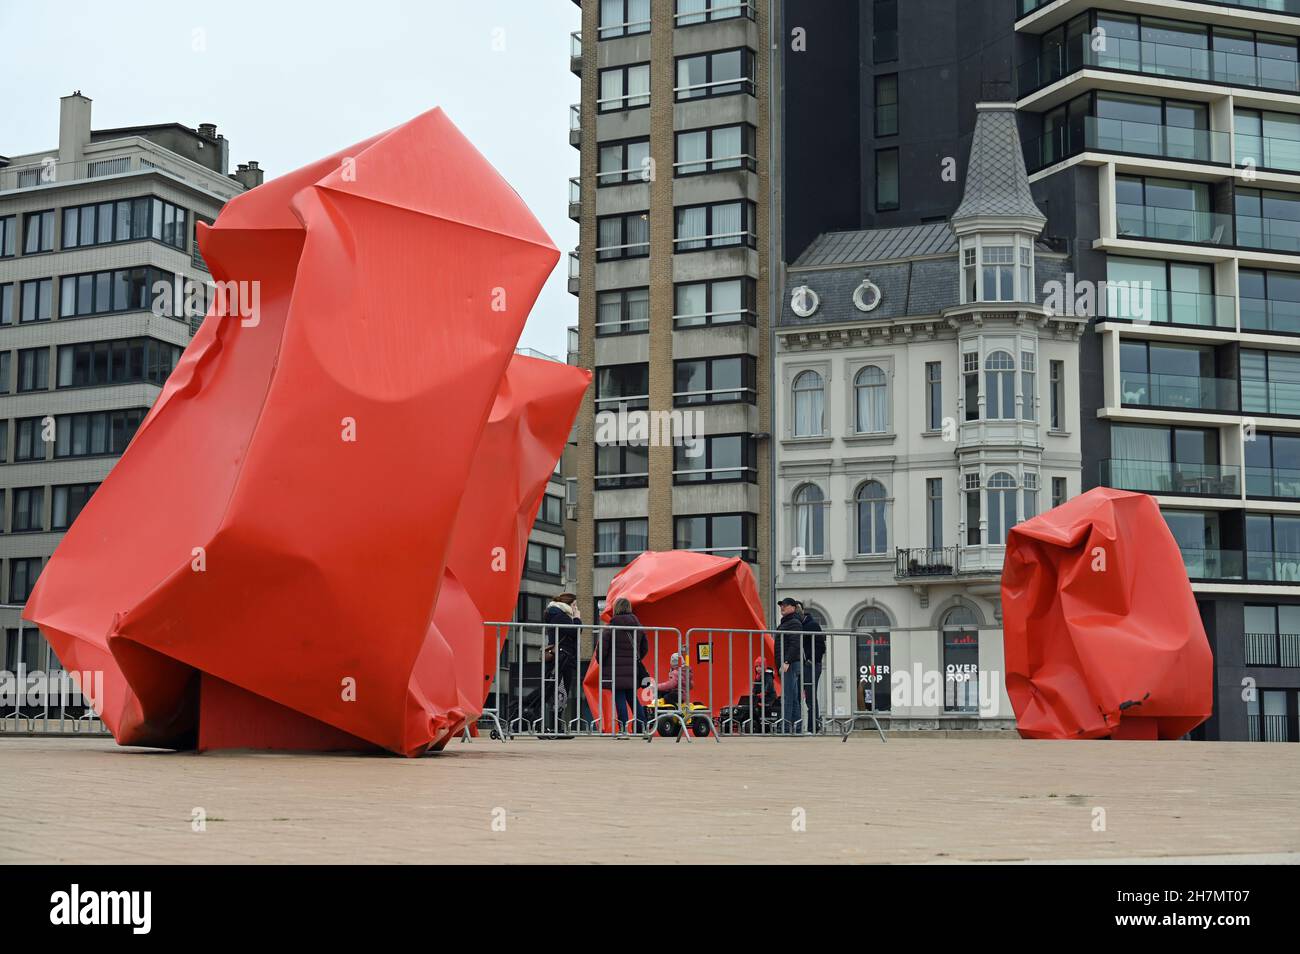 Orange-red abstract sculptures in front of gray facades on the Ostend waterfront Stock Photo